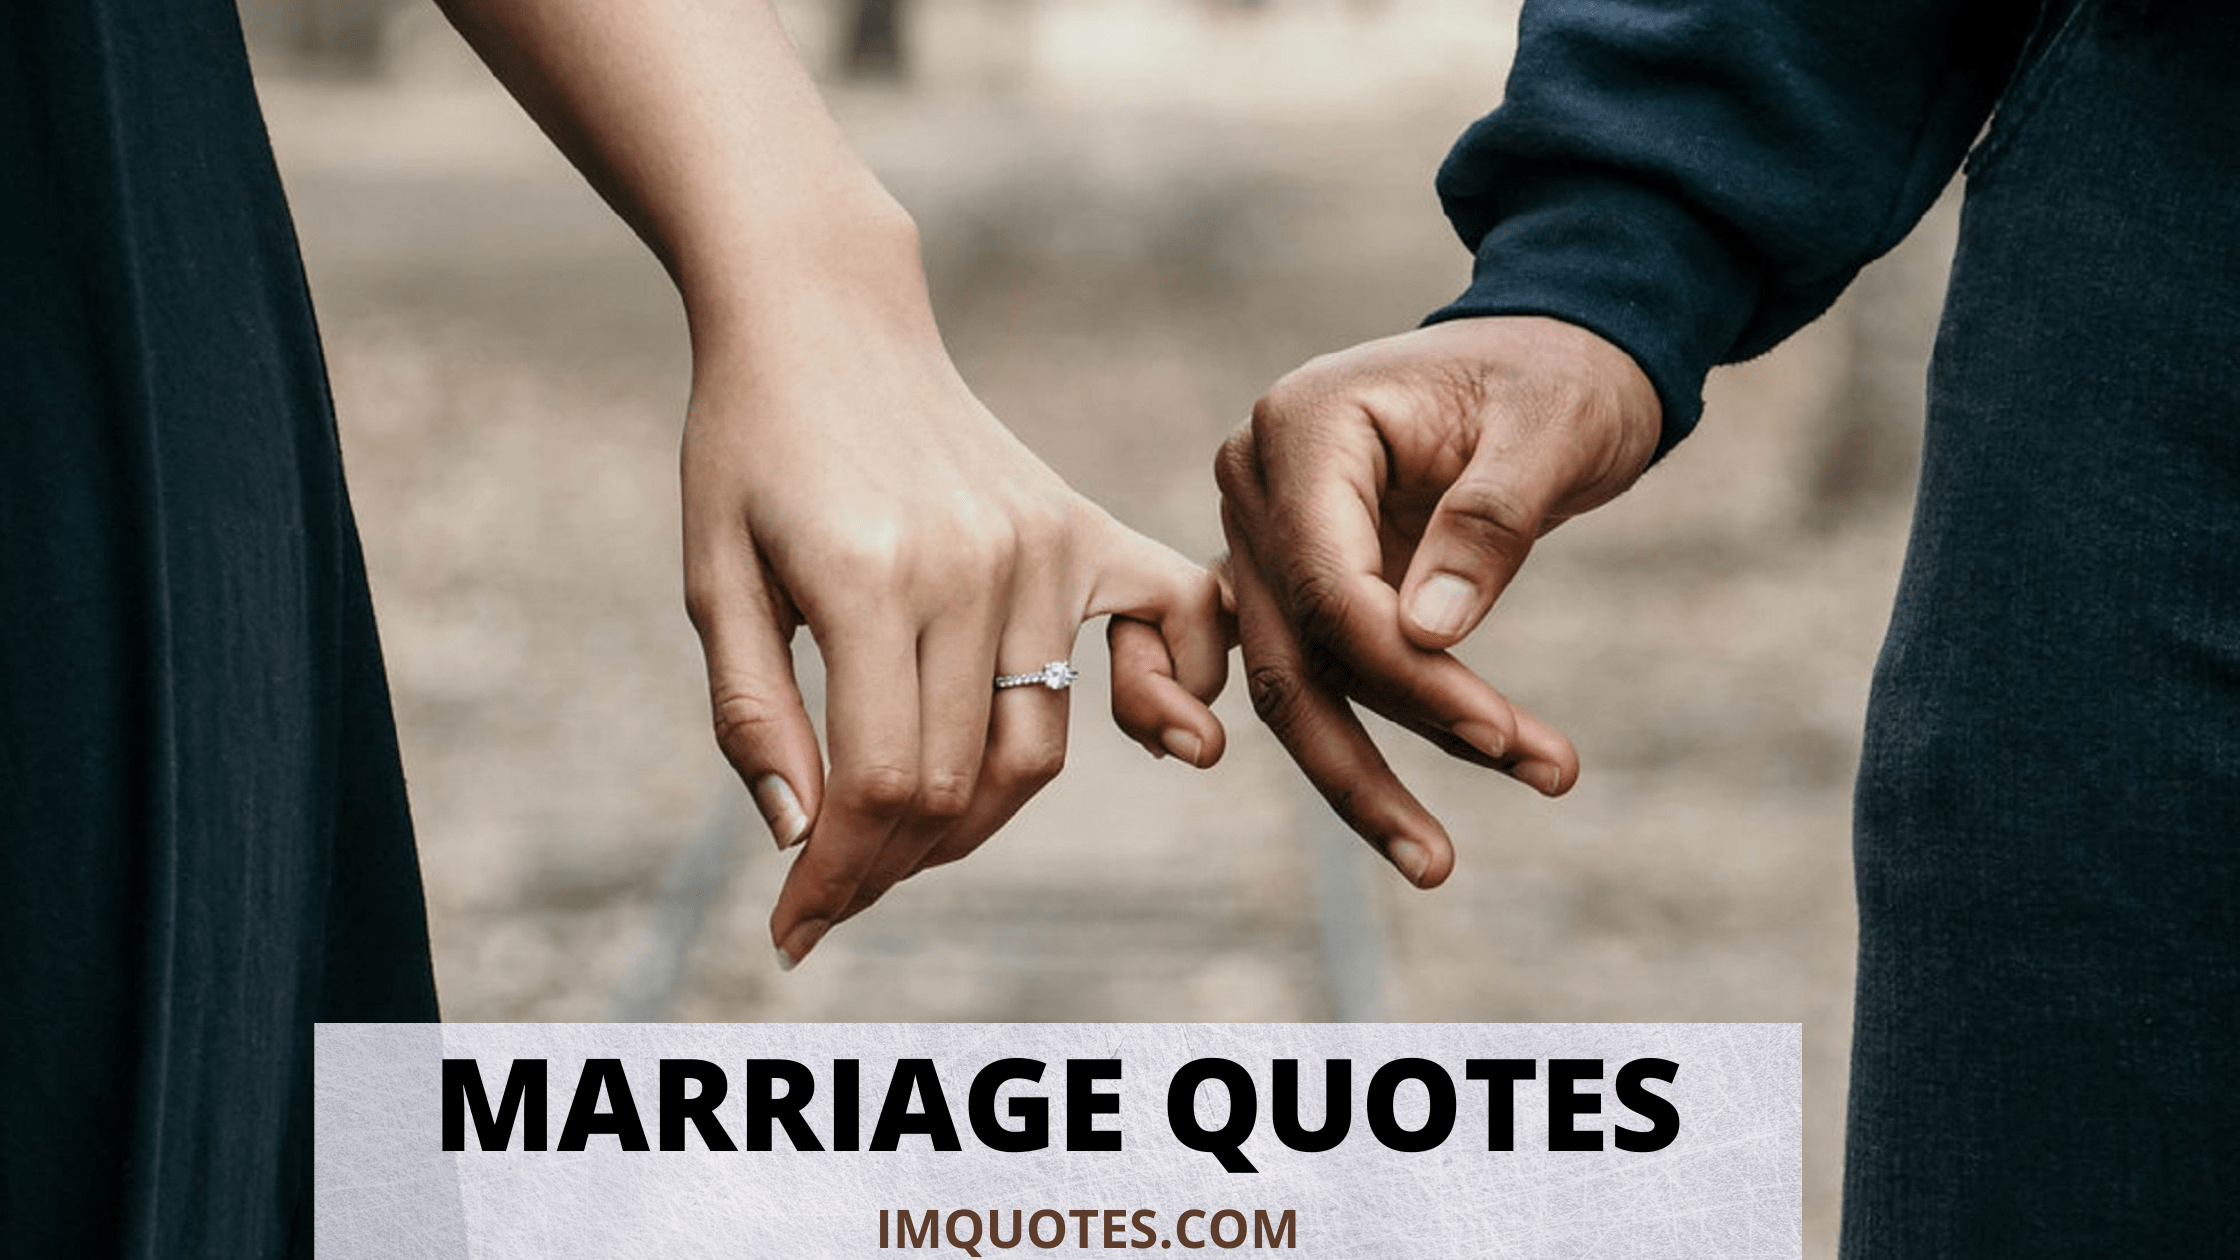 MARRIAGE QUOTES